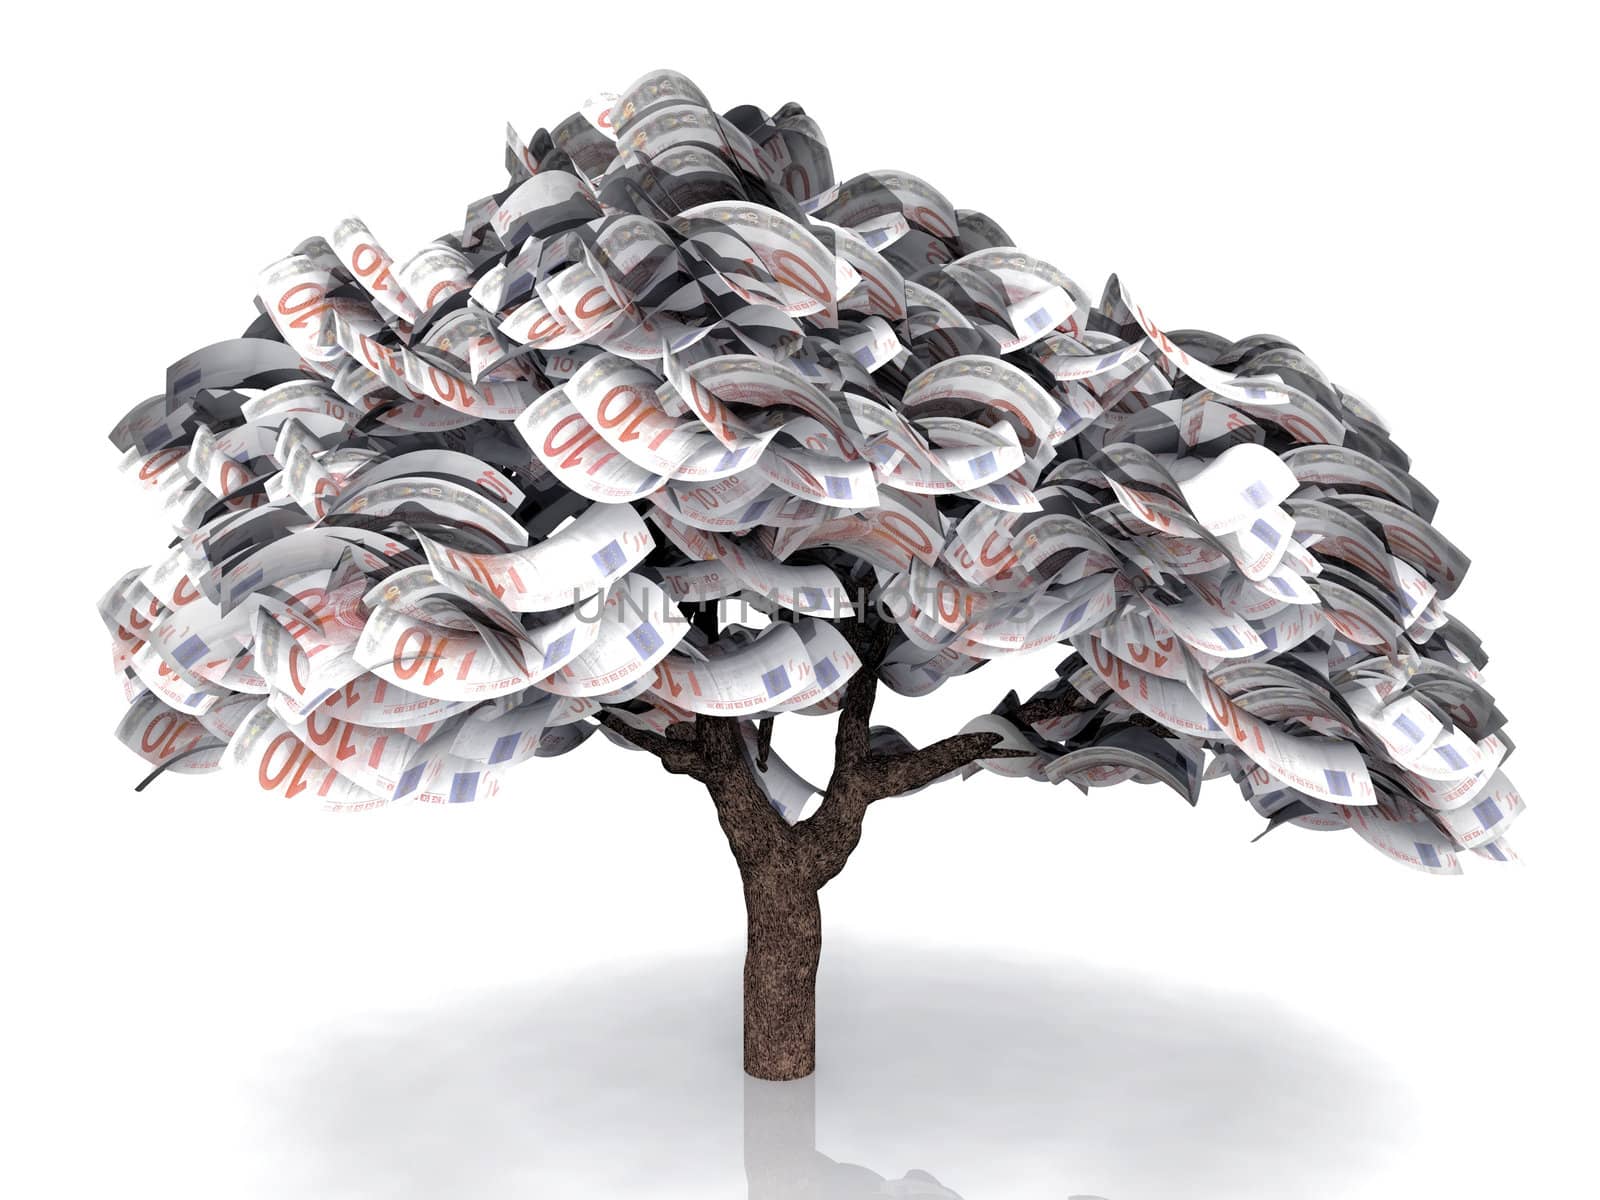 the tree with euro banknotes by njaj